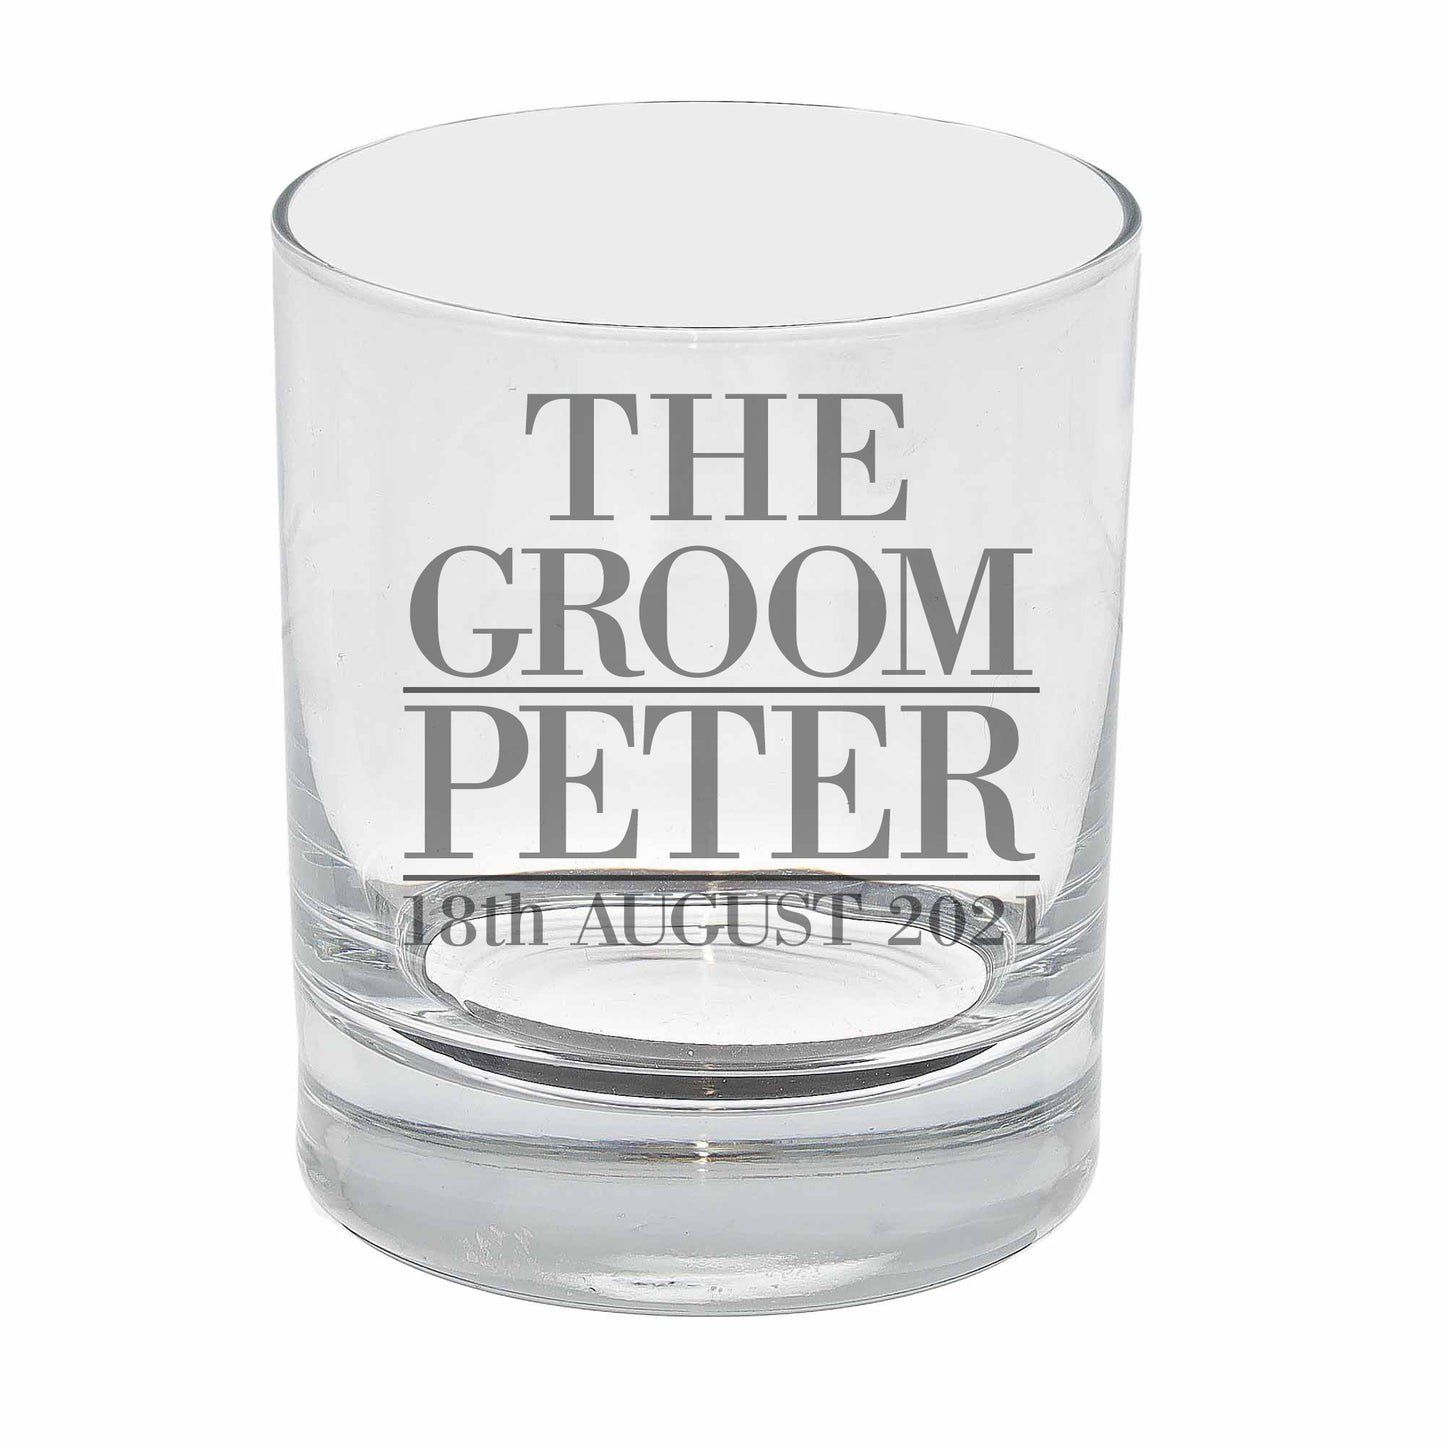 Personalised The Groom Whisky Glass and/or Coaster Set  - Always Looking Good - Whisky Glass On Its Own  